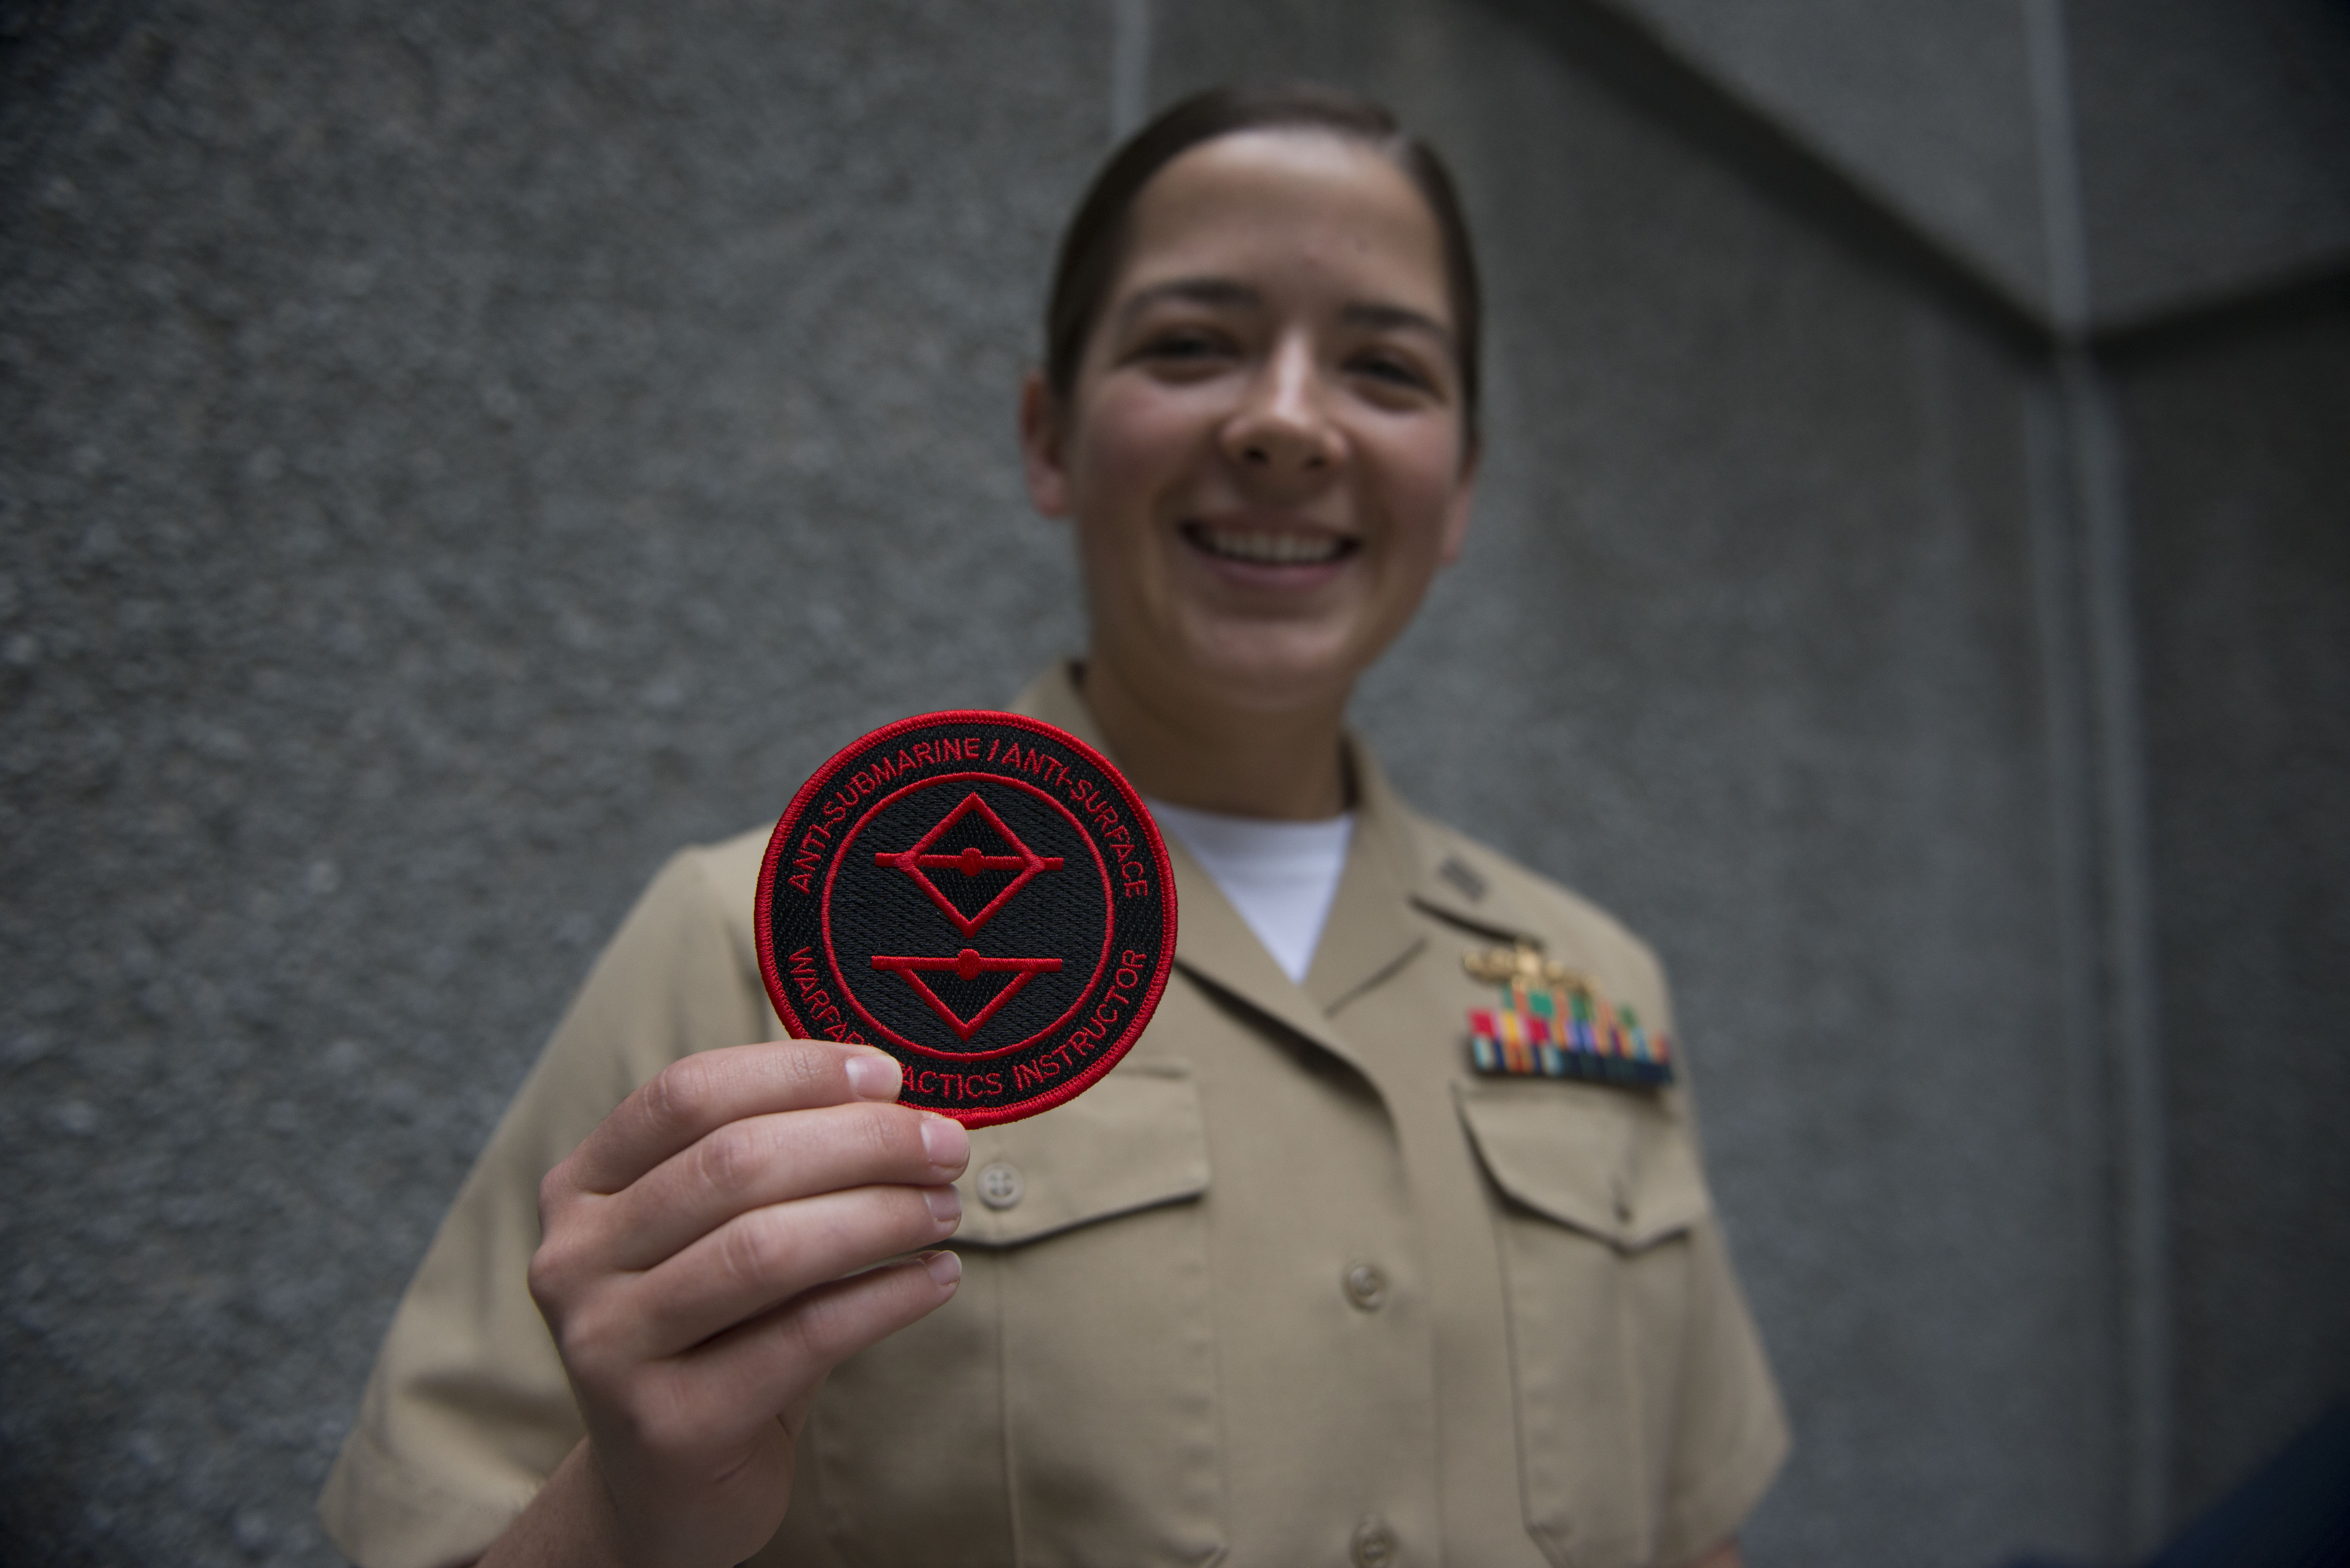 Lt. Kellie Orndorff, one of the first surface warfare officers to graduate from the Anti-Submarine/Anti-Surface Warfare Tactics Instructor course, holds up the patch they received upon graduating the Naval Surface and Mine Warfighting Development Center (SMWDC) course. US Navy photo.